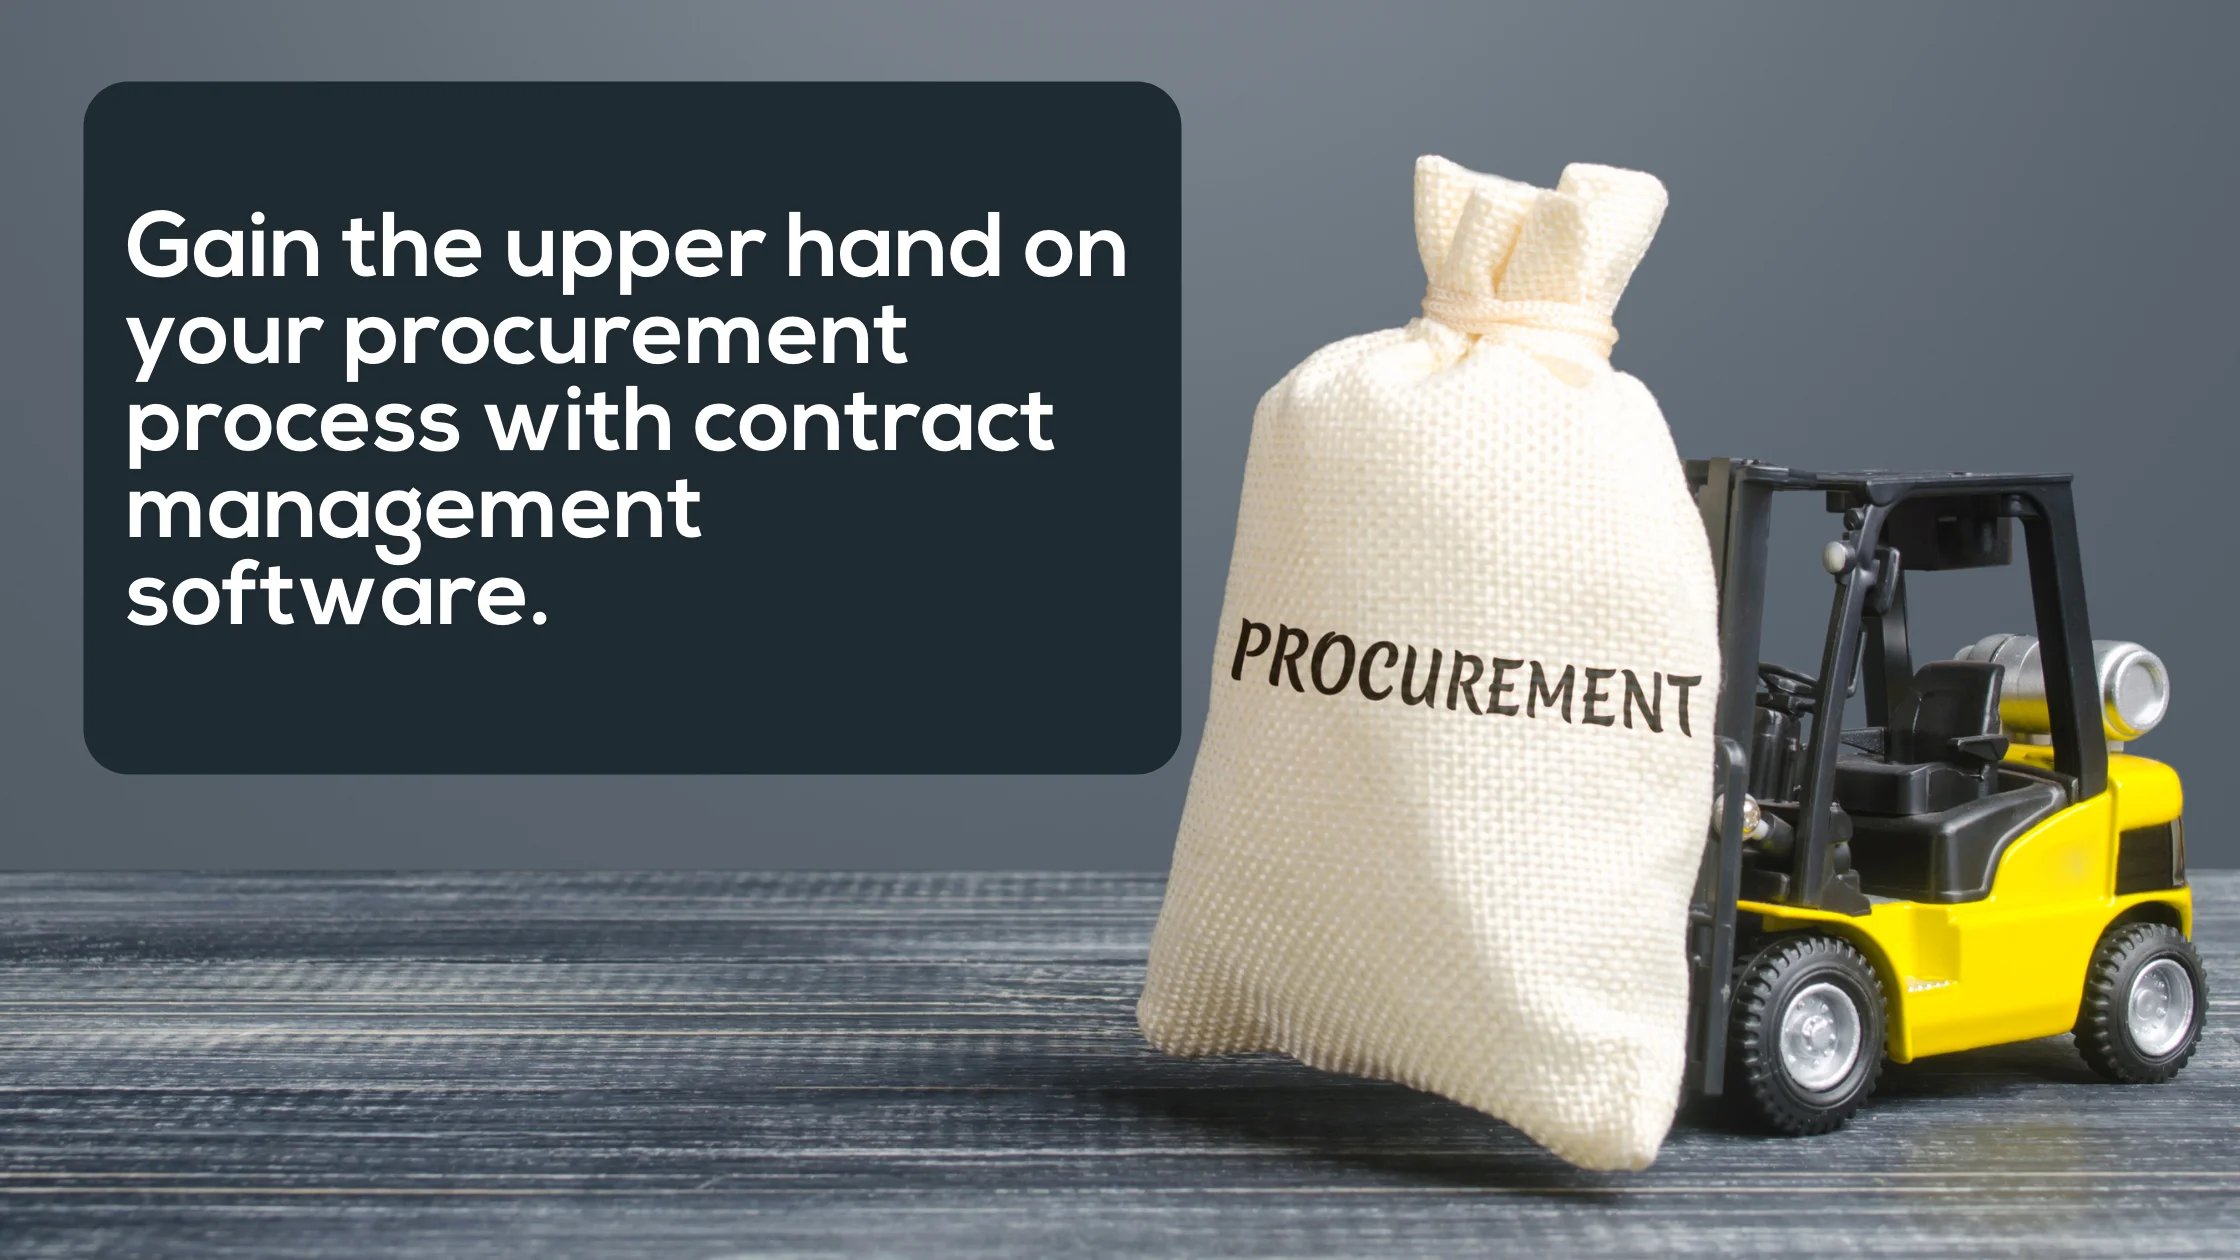 Gain the upper hand on your procurement process with contract management software.